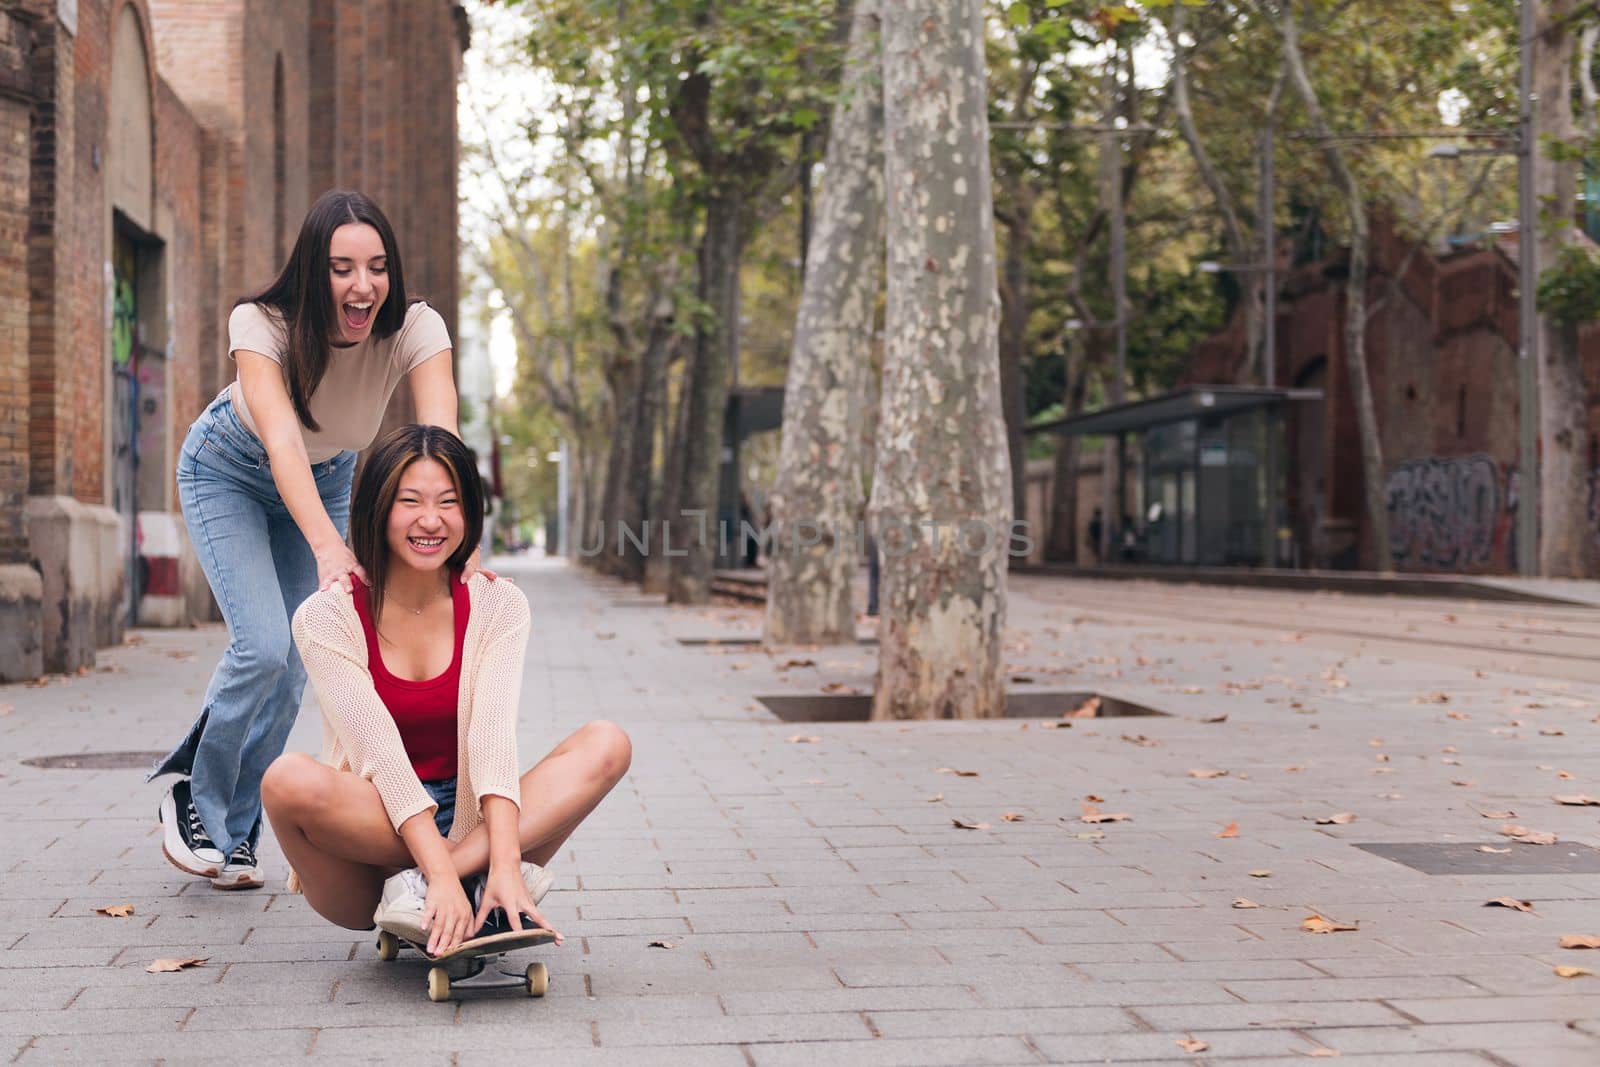 young woman laughing and having a good time pushing her friend sitting on a skateboard down a city street, concept of friendship and teenager lifestyle, copy space for text